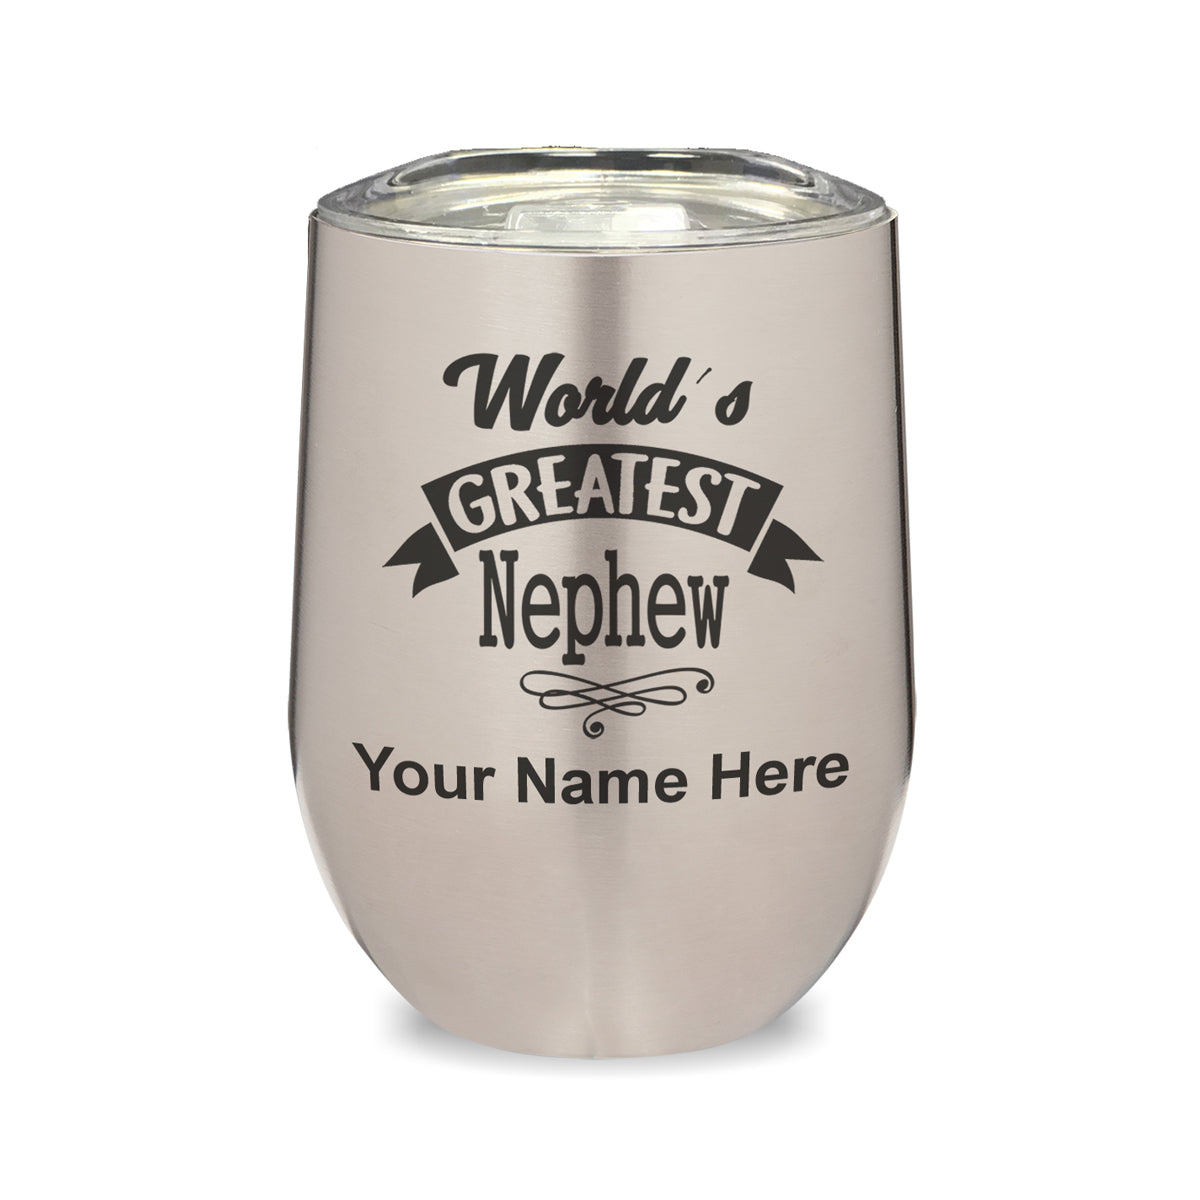 LaserGram Double Wall Stainless Steel Wine Glass, World's Greatest Nephew, Personalized Engraving Included